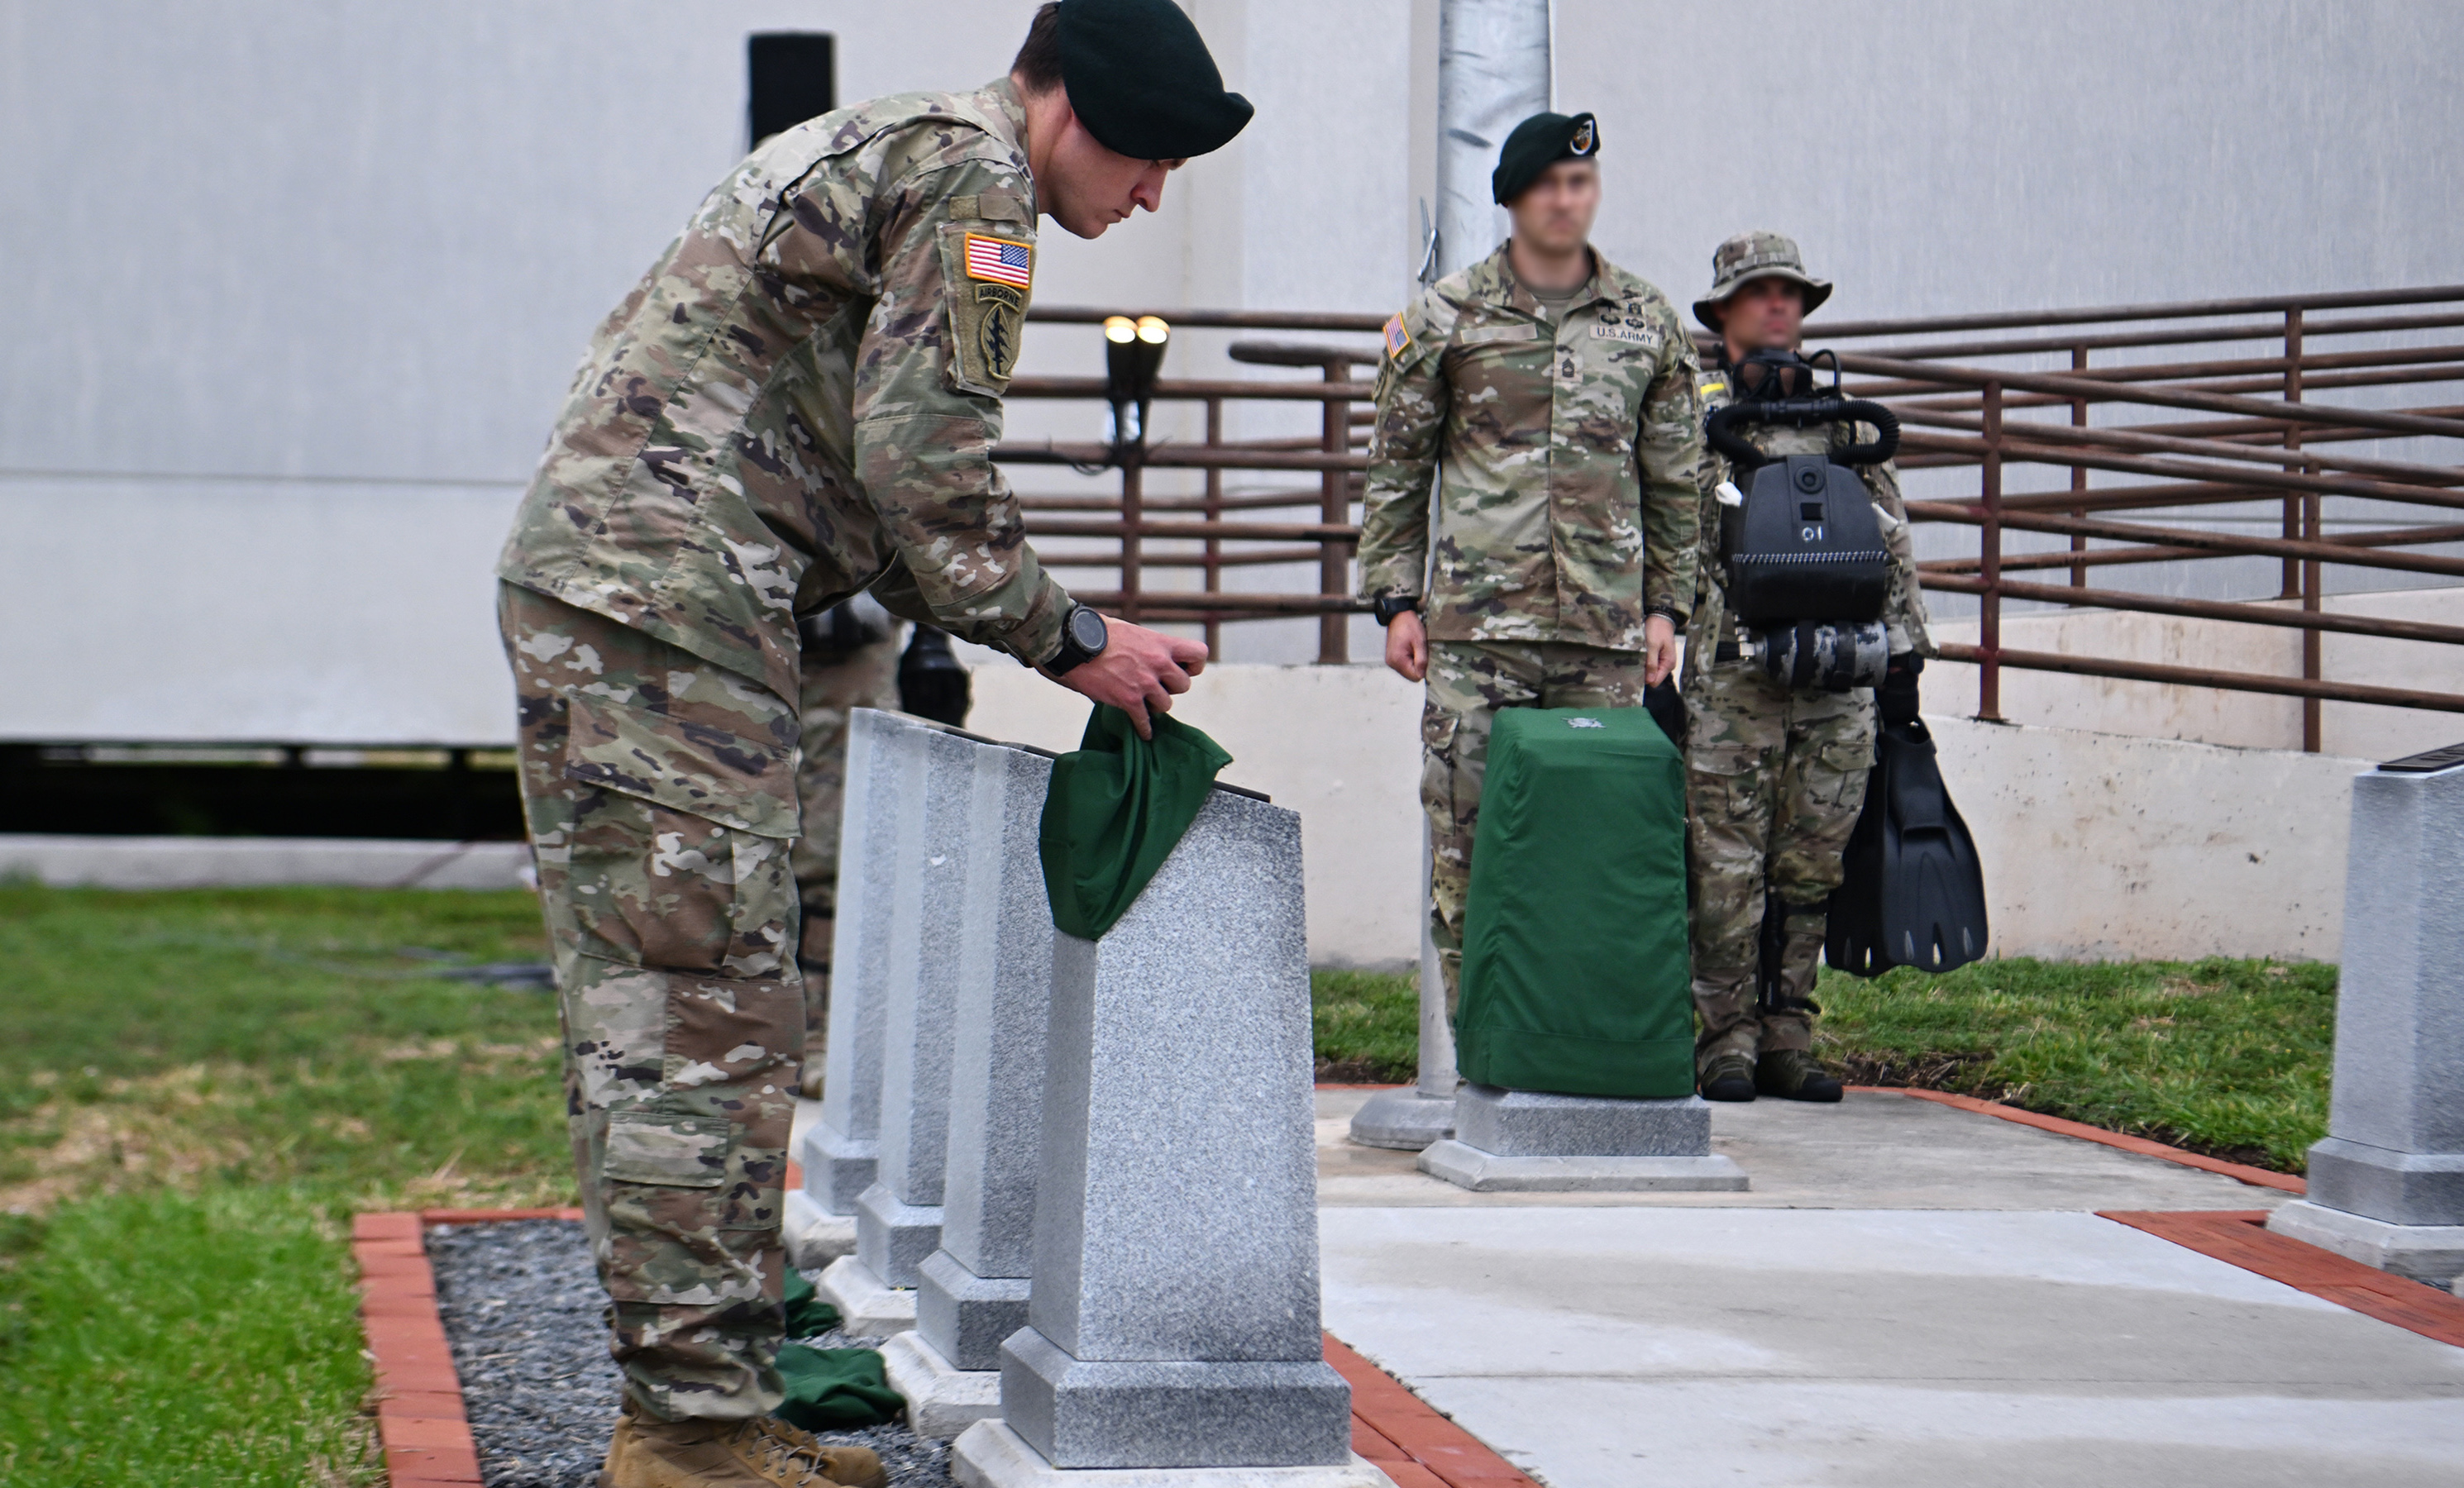 A Soldier from the U.S. Army John F. Kennedy Special Warfare Center and School, removes a cover to reveal a marker honoring a fallen service member during a memorial ceremony at the Special Forces Underwater Operations School at Naval Air Station Key West, Florida, June 11, 2024. The ceremony honored the eight fallen service members who gave their last breath while training at the school which has been operating for more than 60 years. (U.S. Army photo by K. Kassens)